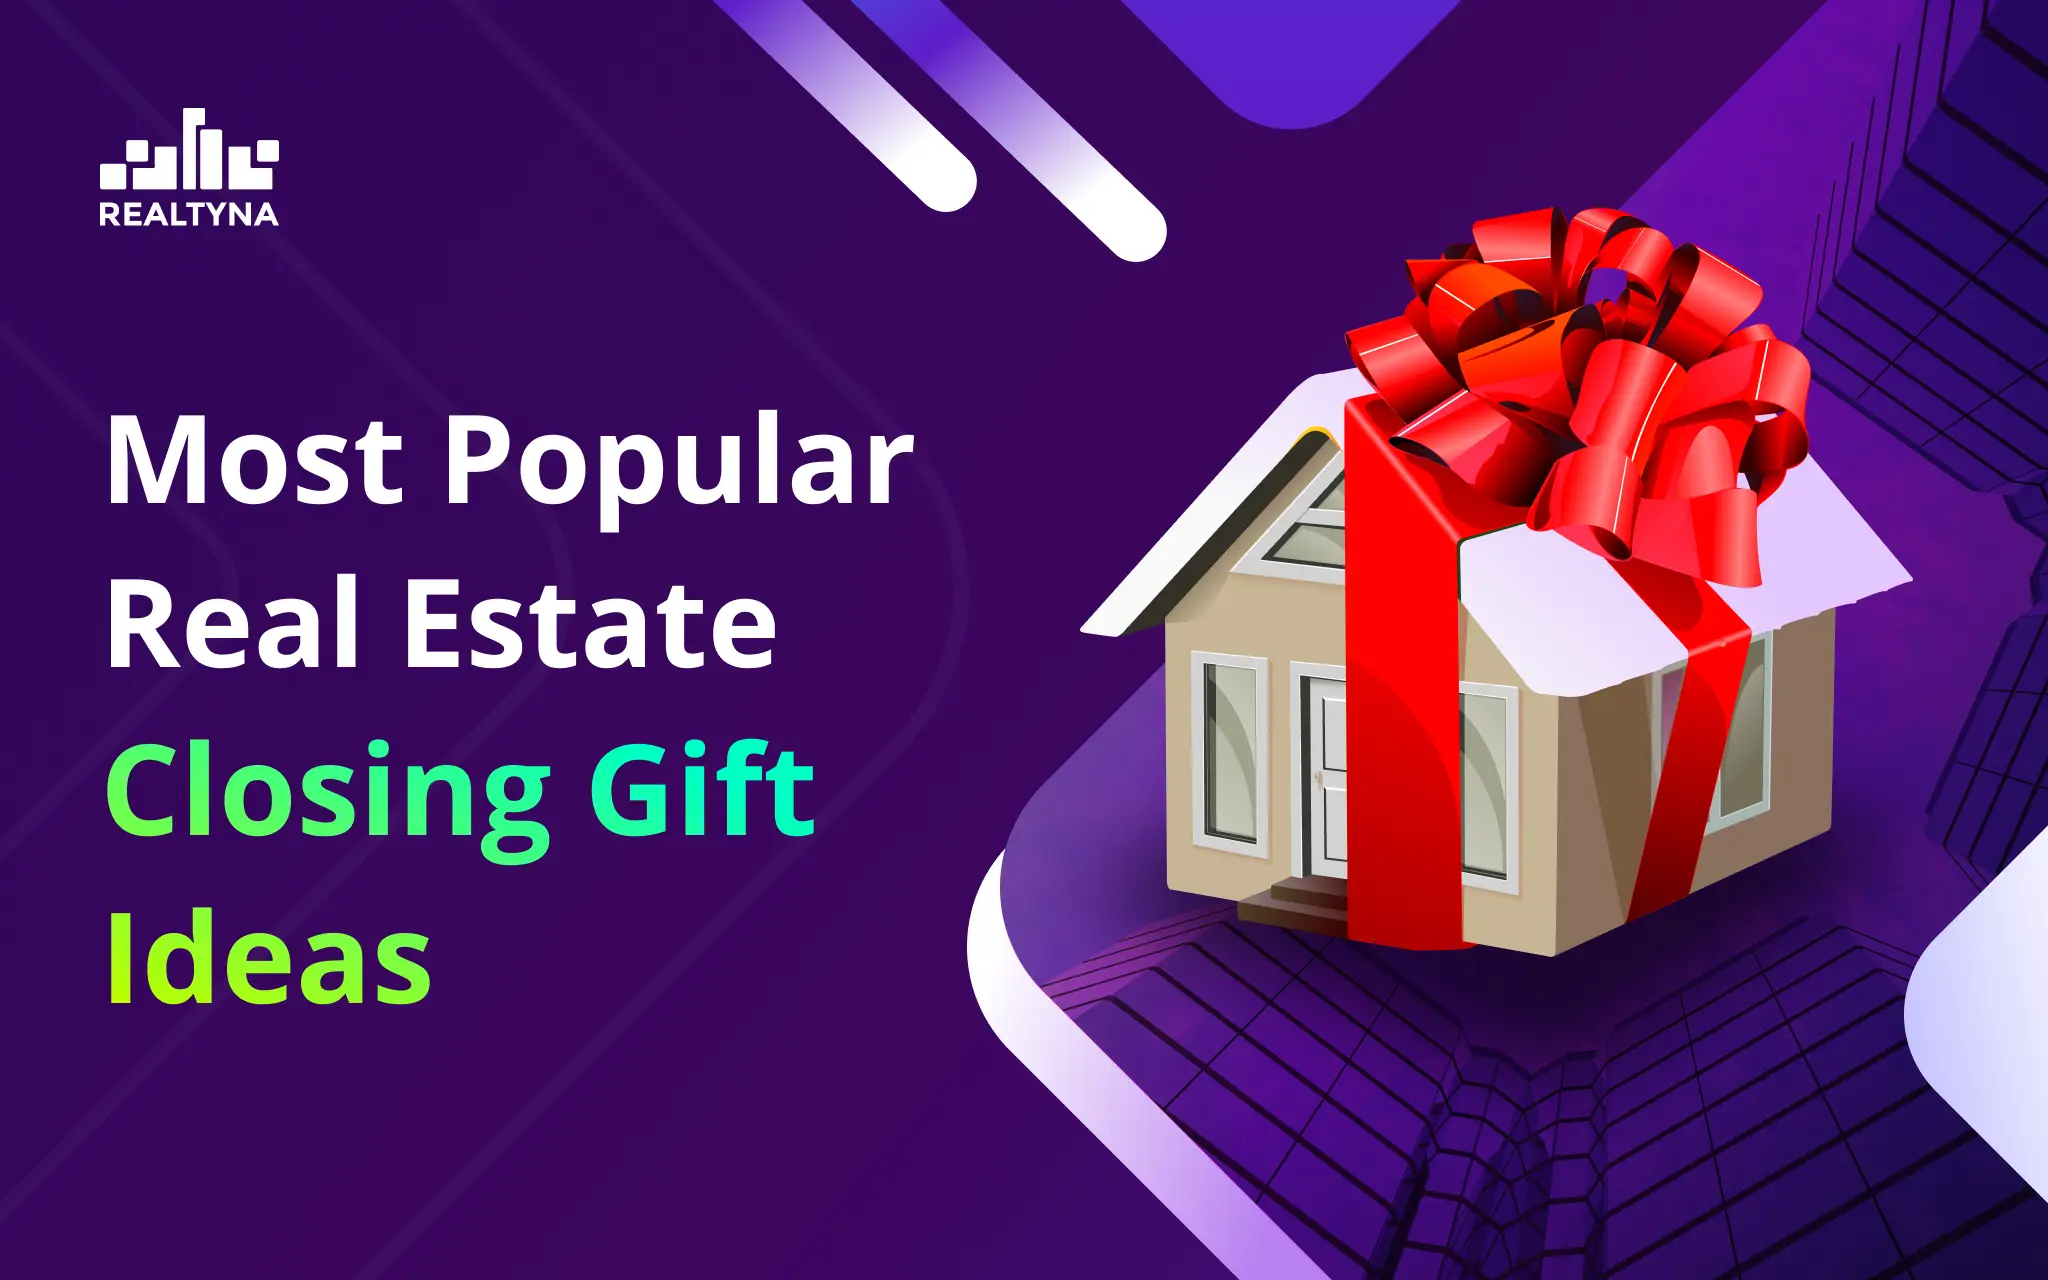 Most Popular Real Estate Closing Gift Ideas